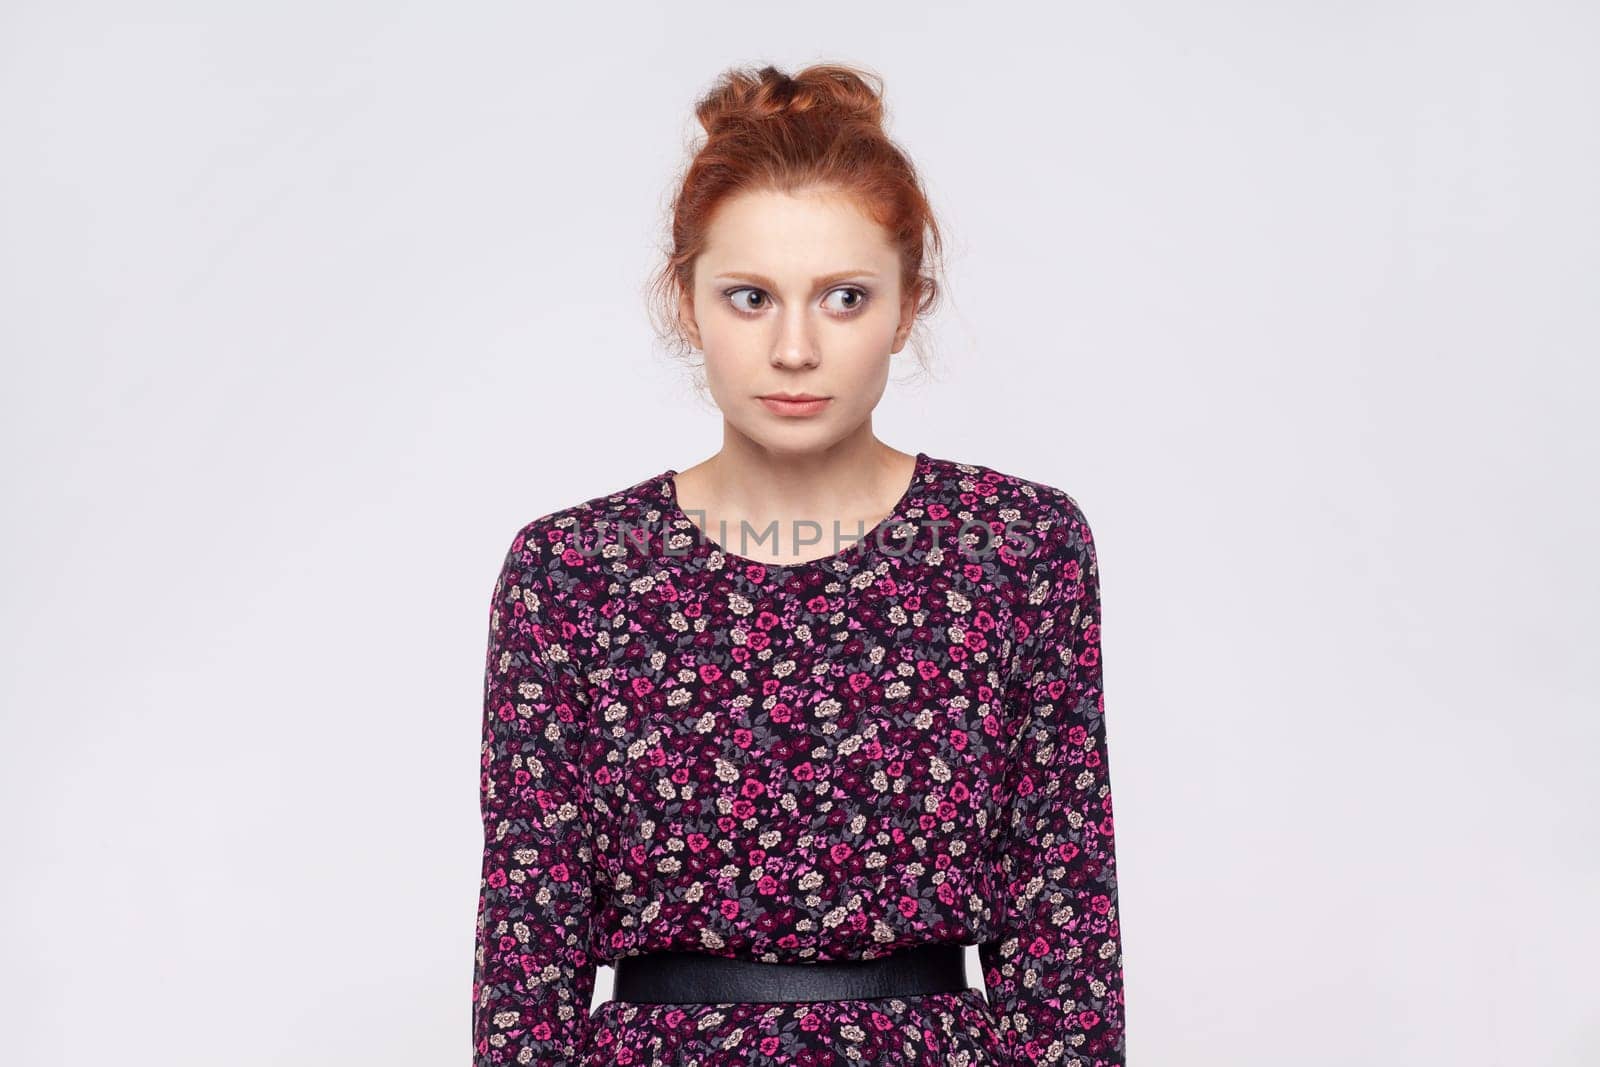 Portrait of worried serious young adult attractive ginger woman wearing dress looking away with scared, frighten expression, thinking. Indoor studio shot isolated on gray background.